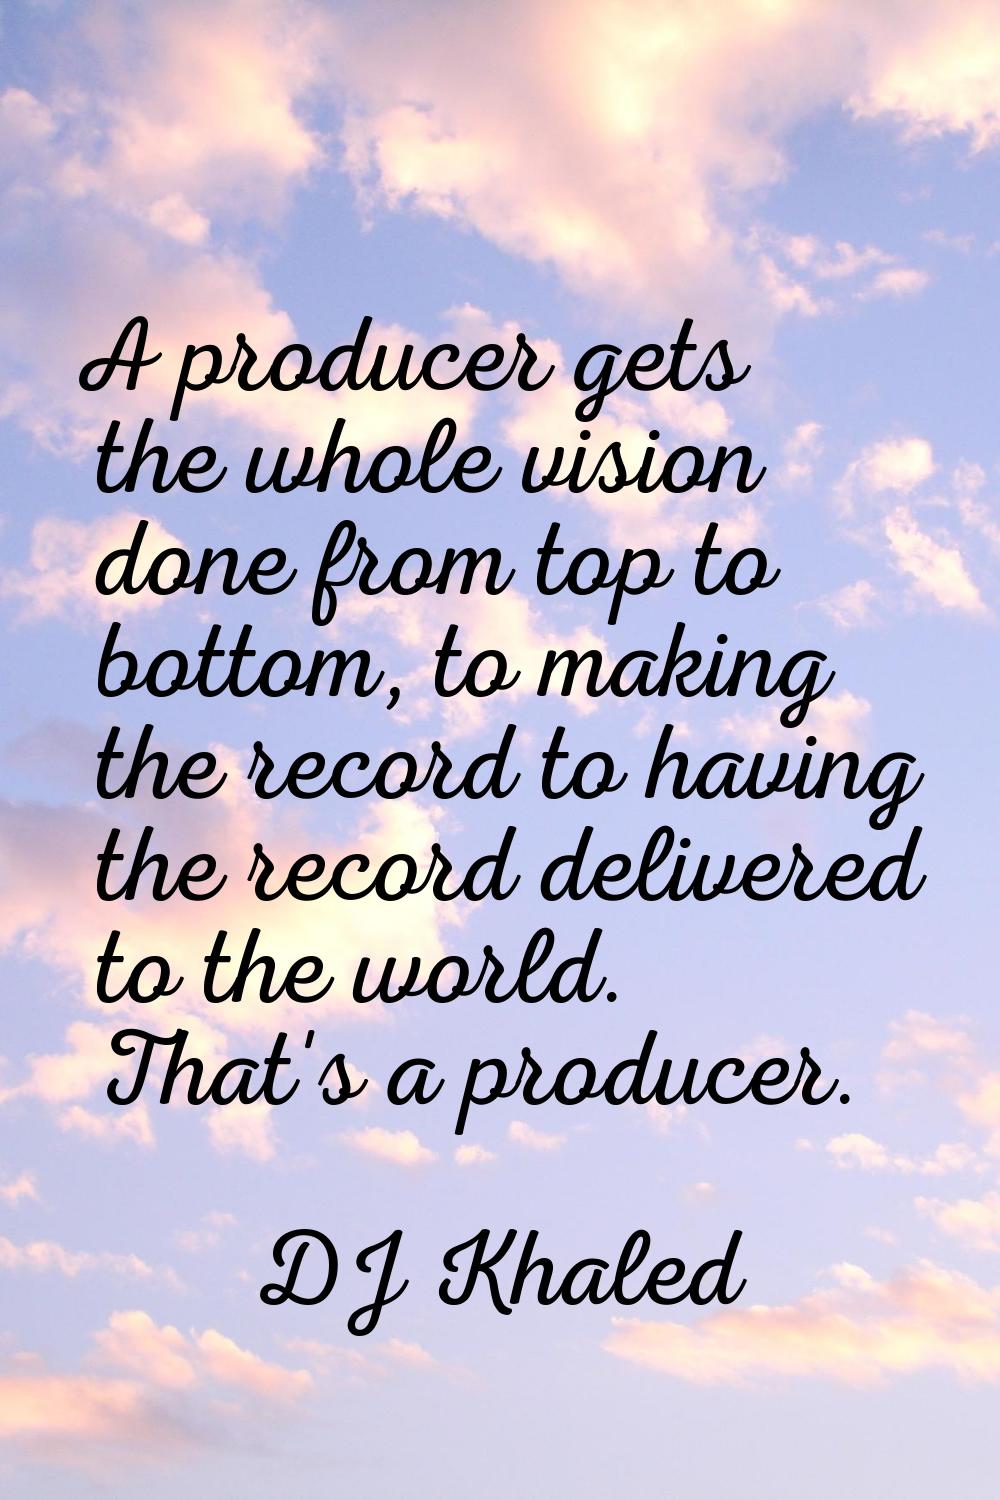 A producer gets the whole vision done from top to bottom, to making the record to having the record